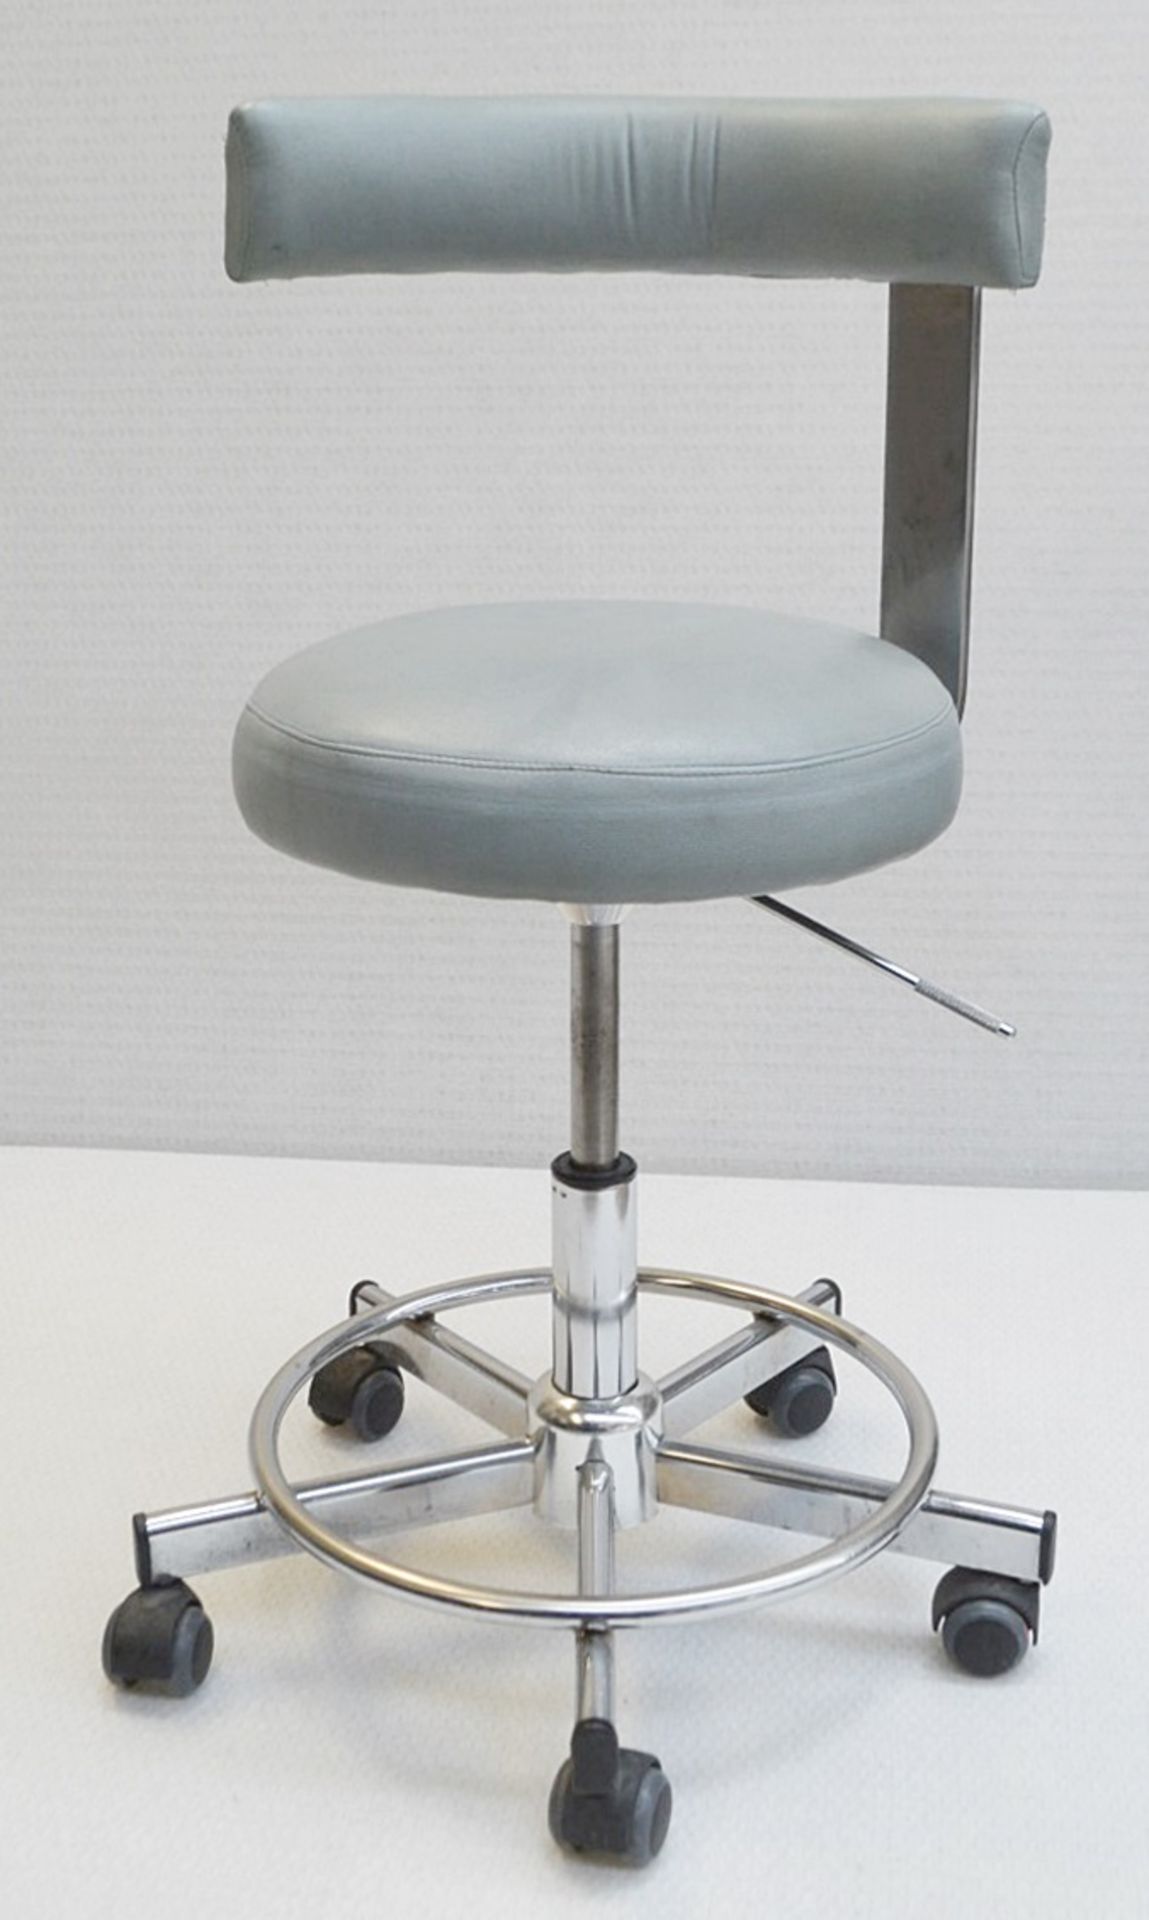 4 x Upholstered Gas Lift Treatment Stools - Dimensions: W47 x D49 x H72-85cm - Ref: MHB102 - CL670 - - Image 5 of 7